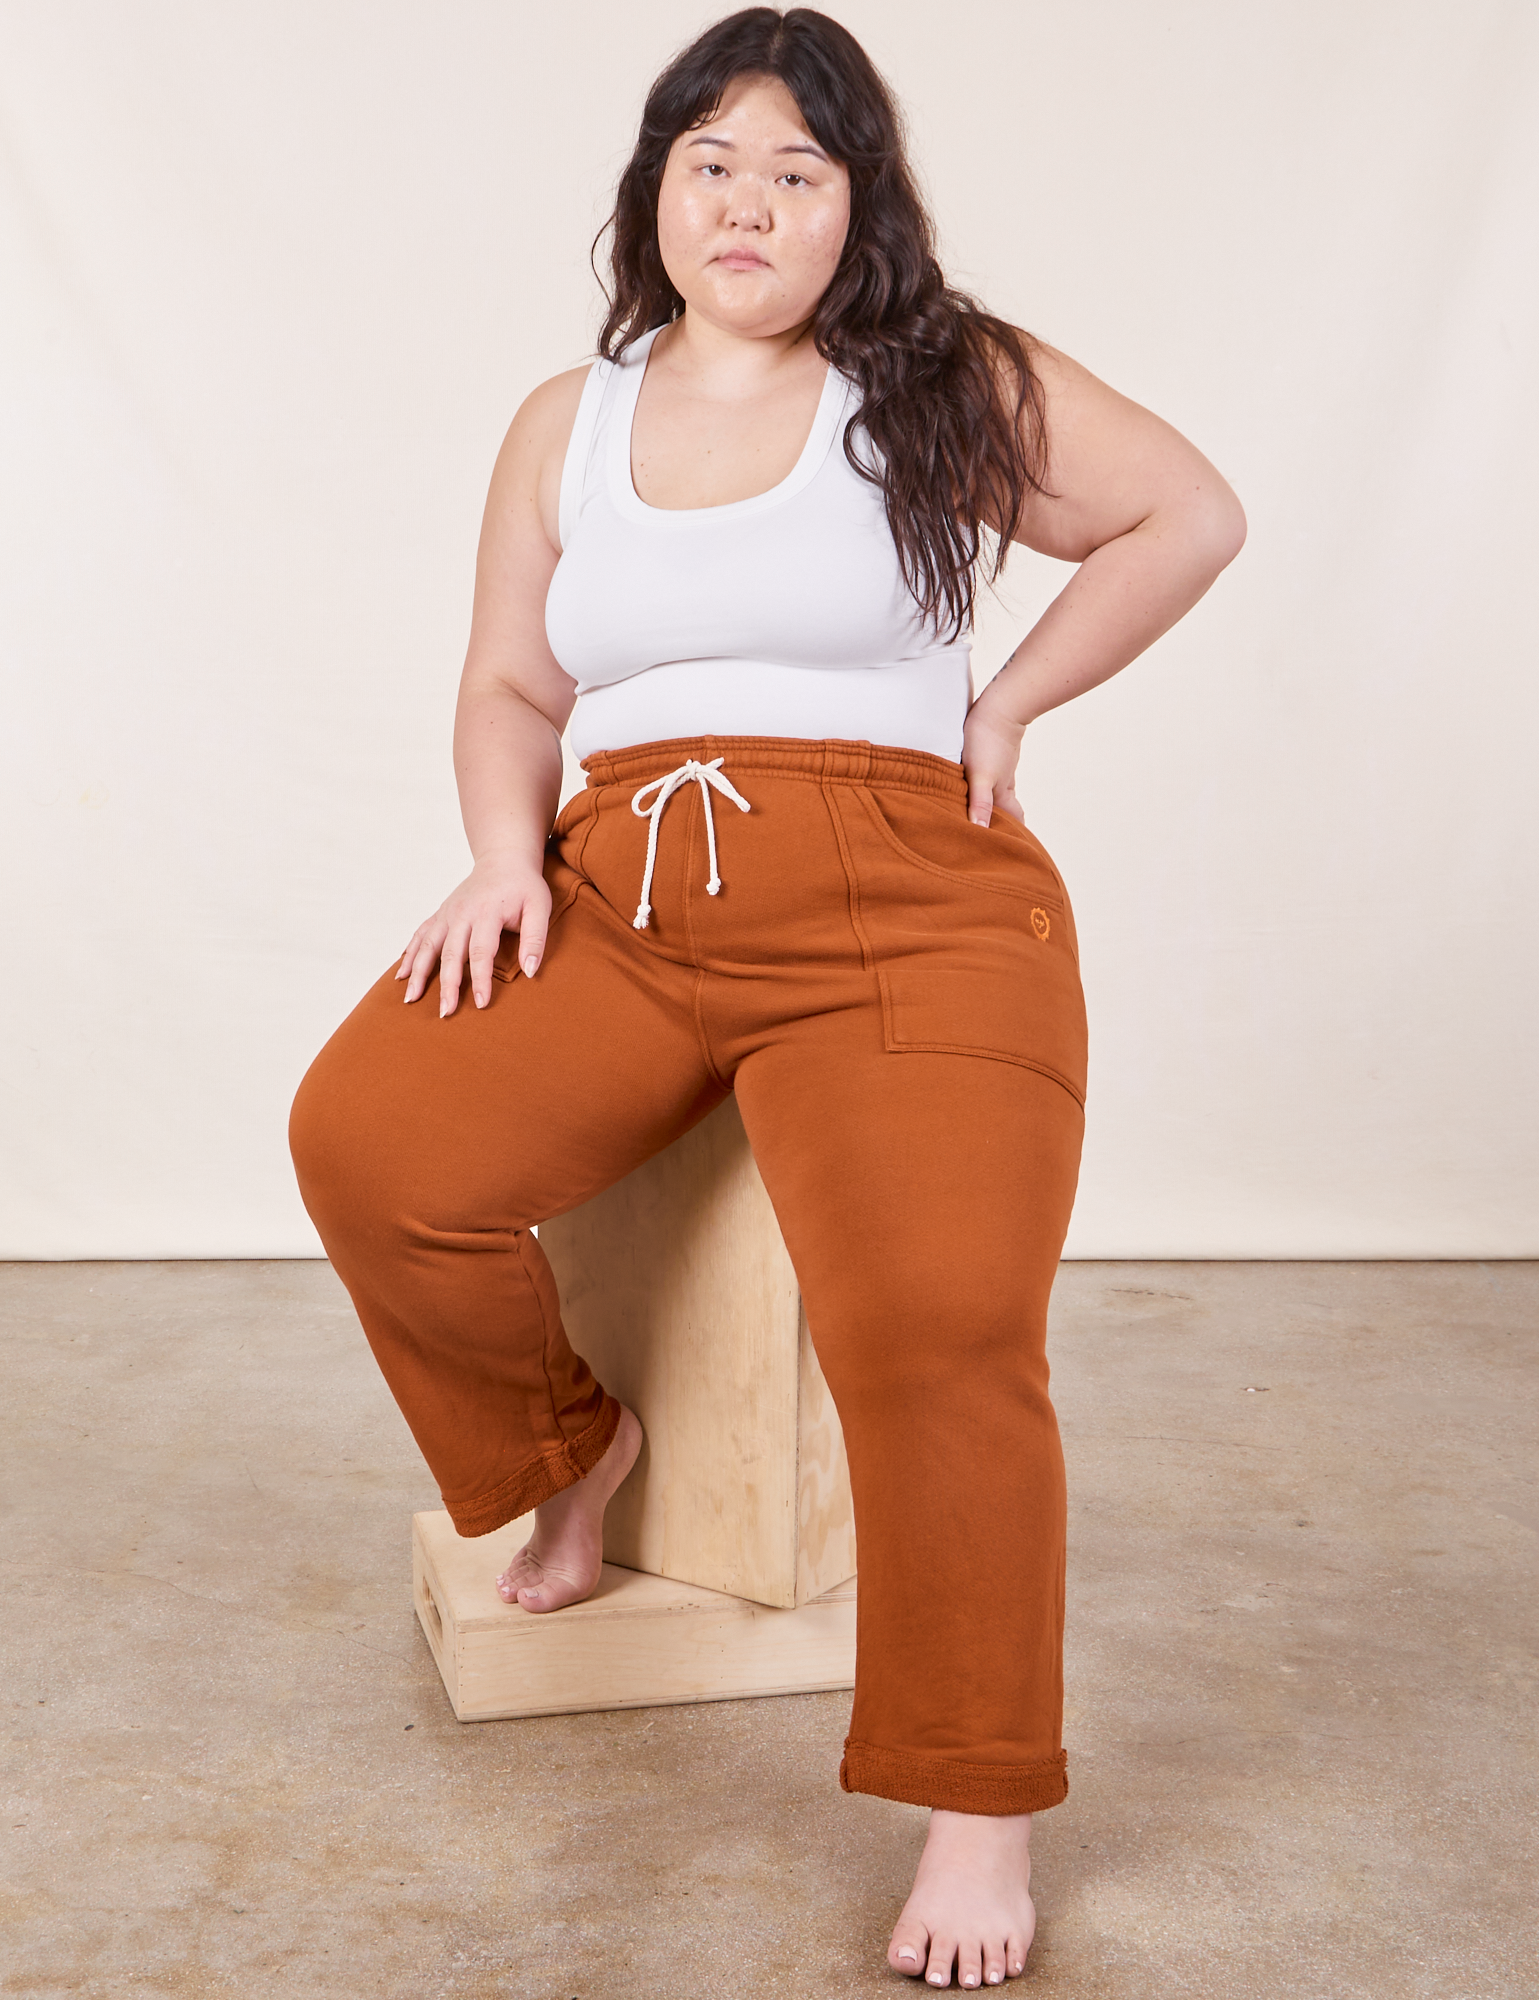 Ashley is wearing Cropped Rolled Cuff Sweatpants in Burnt Terracotta and vintage off-white Cropped Tank Top